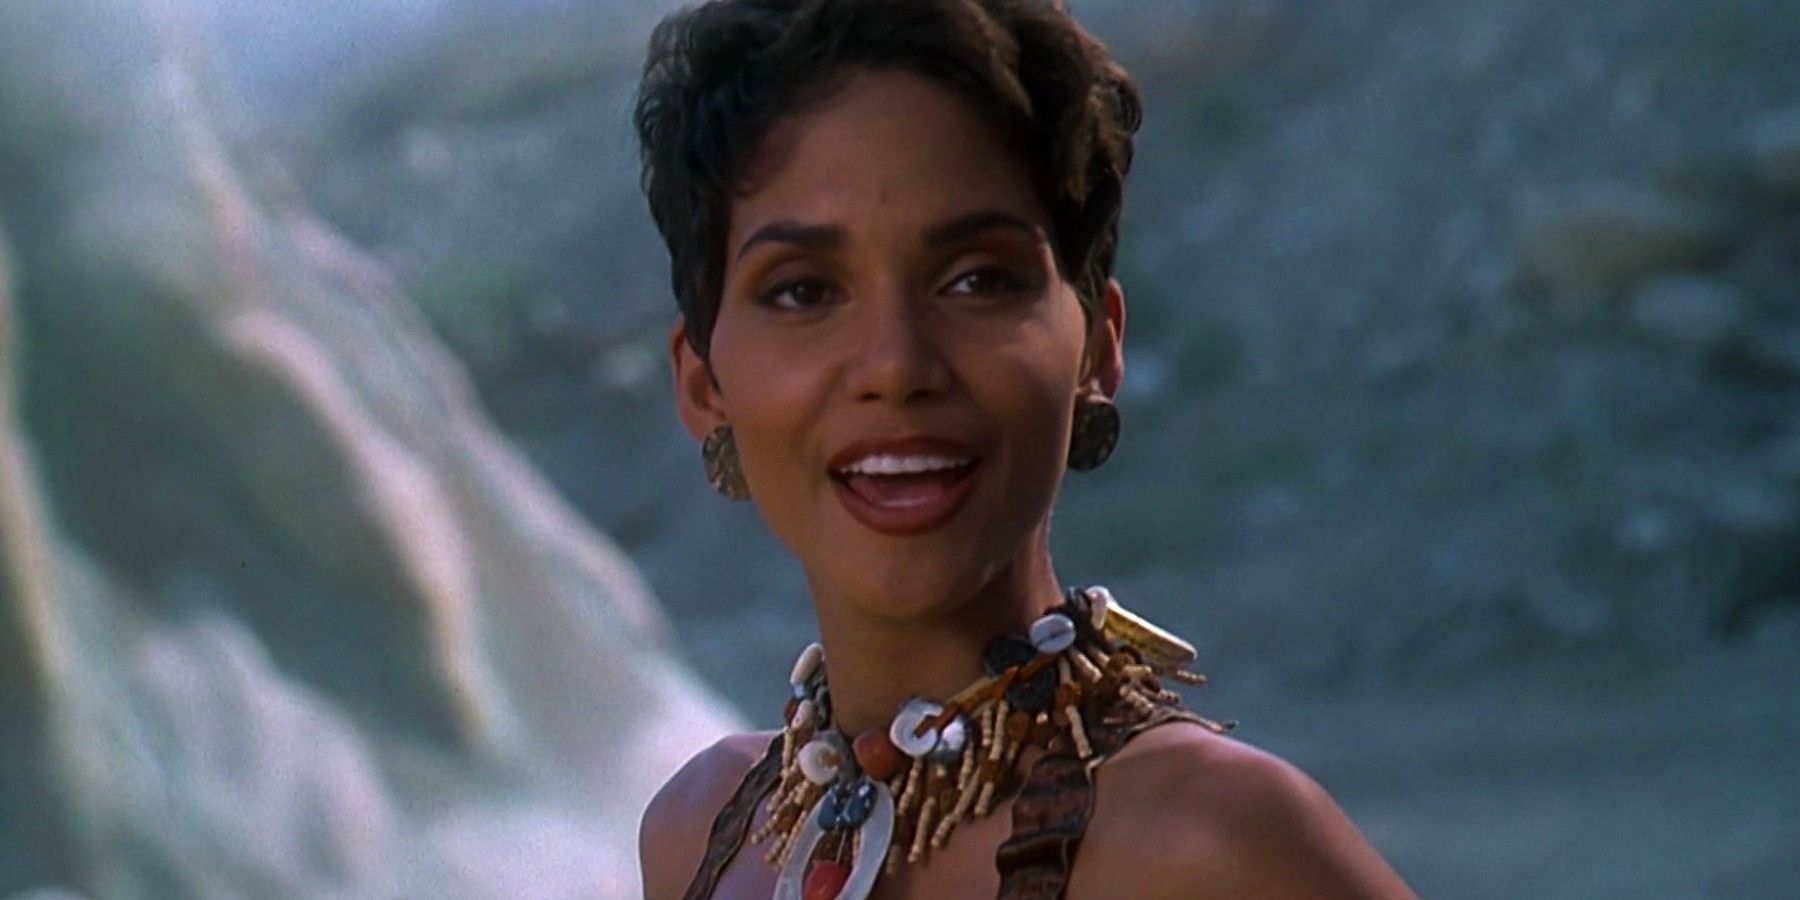 Flintstones Halle Berry wearing a beaded necklace and circular earrings and smiling towards the camera